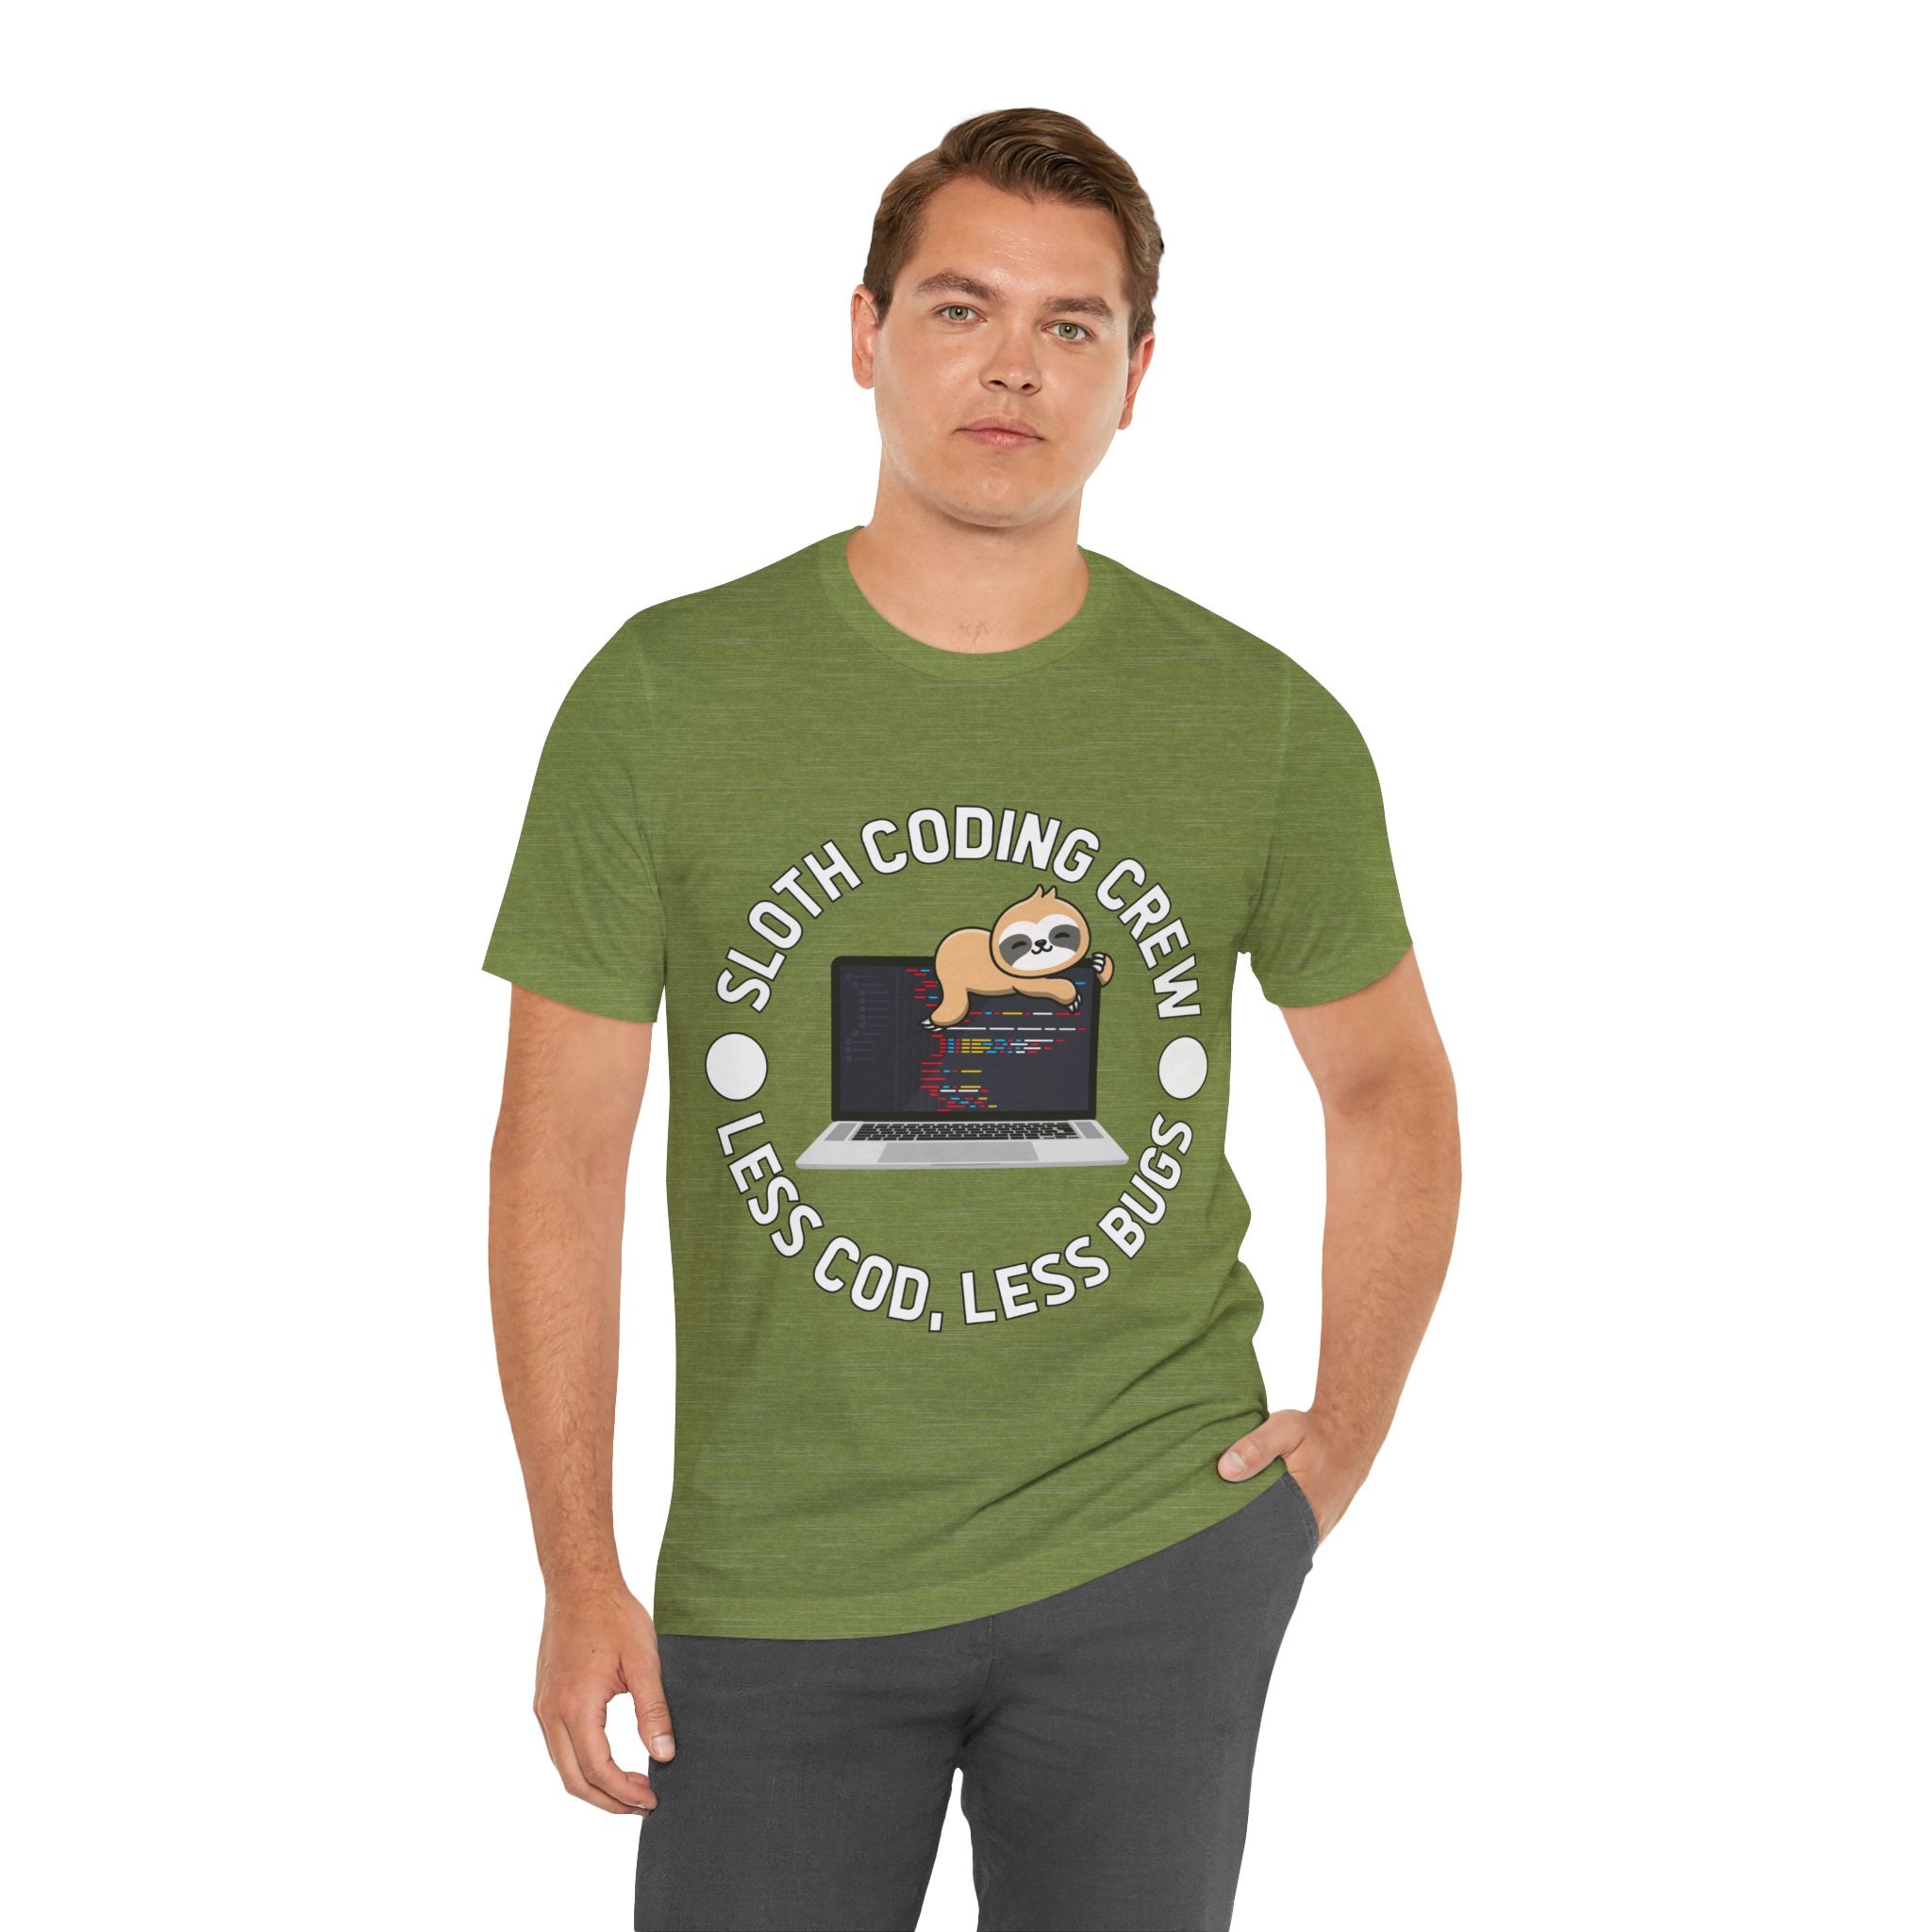 A man wearing a green unisex jersey tee with "Sloth Coding Crew Less Cod Less Bugs" and an image of a sloth on a laptop printed on it.